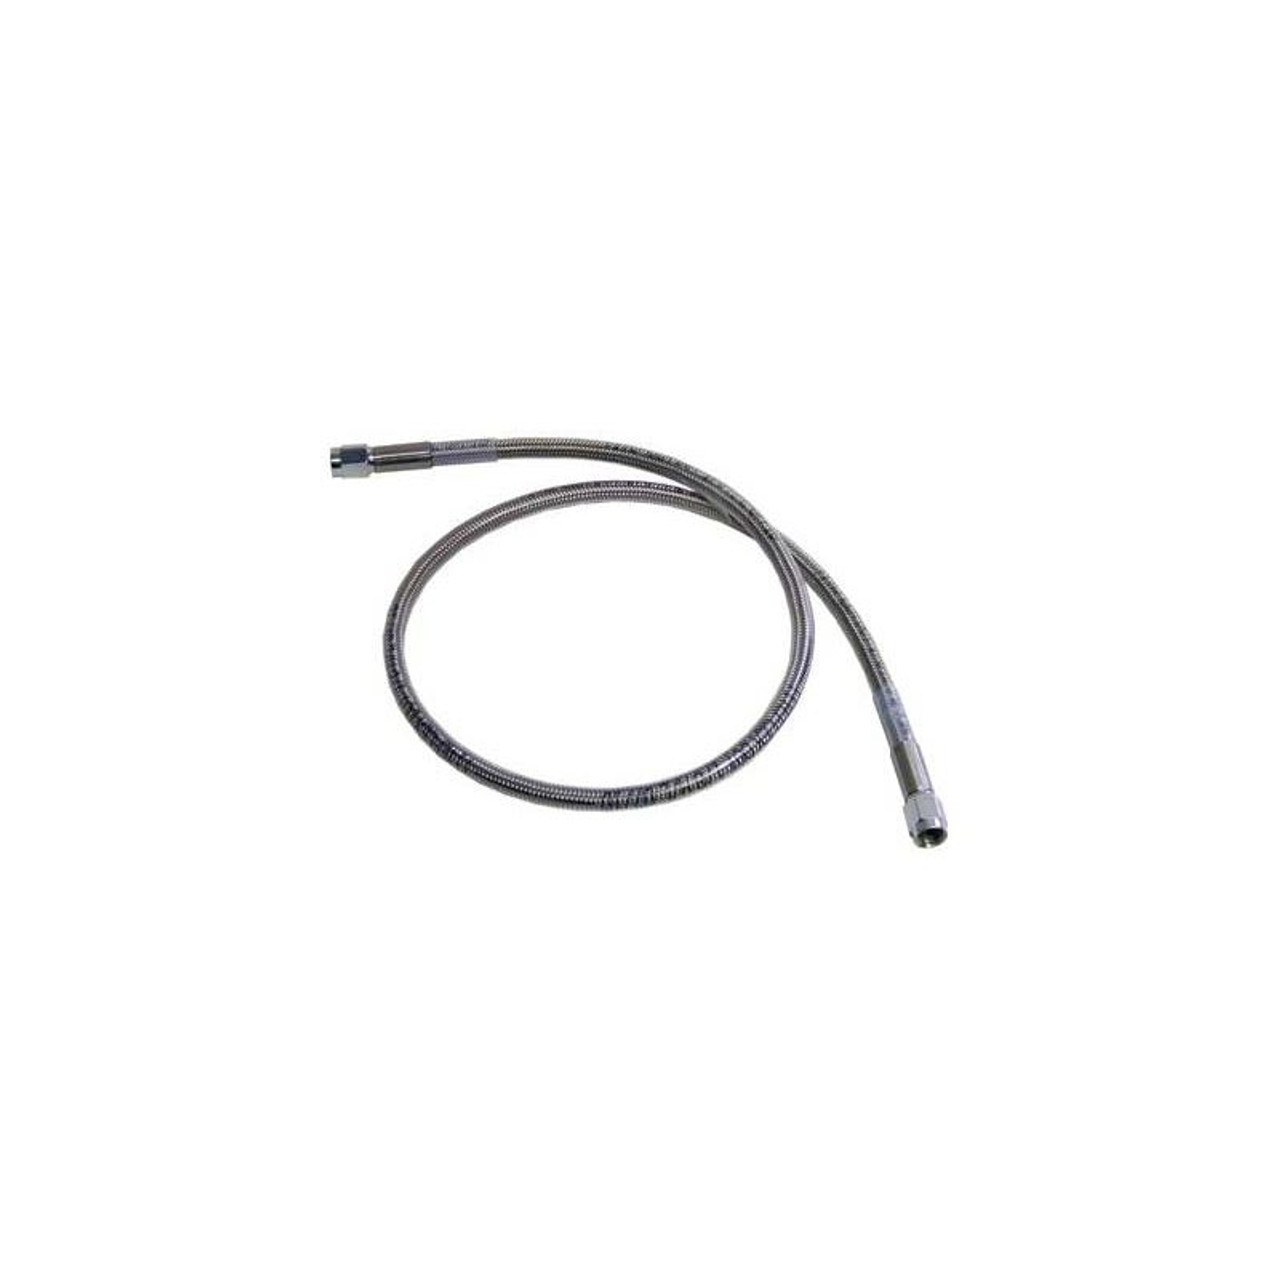 Big End Performance 21120 -3AN Stainless Steel Brake Line, 20 in.  Straight/90 Degree